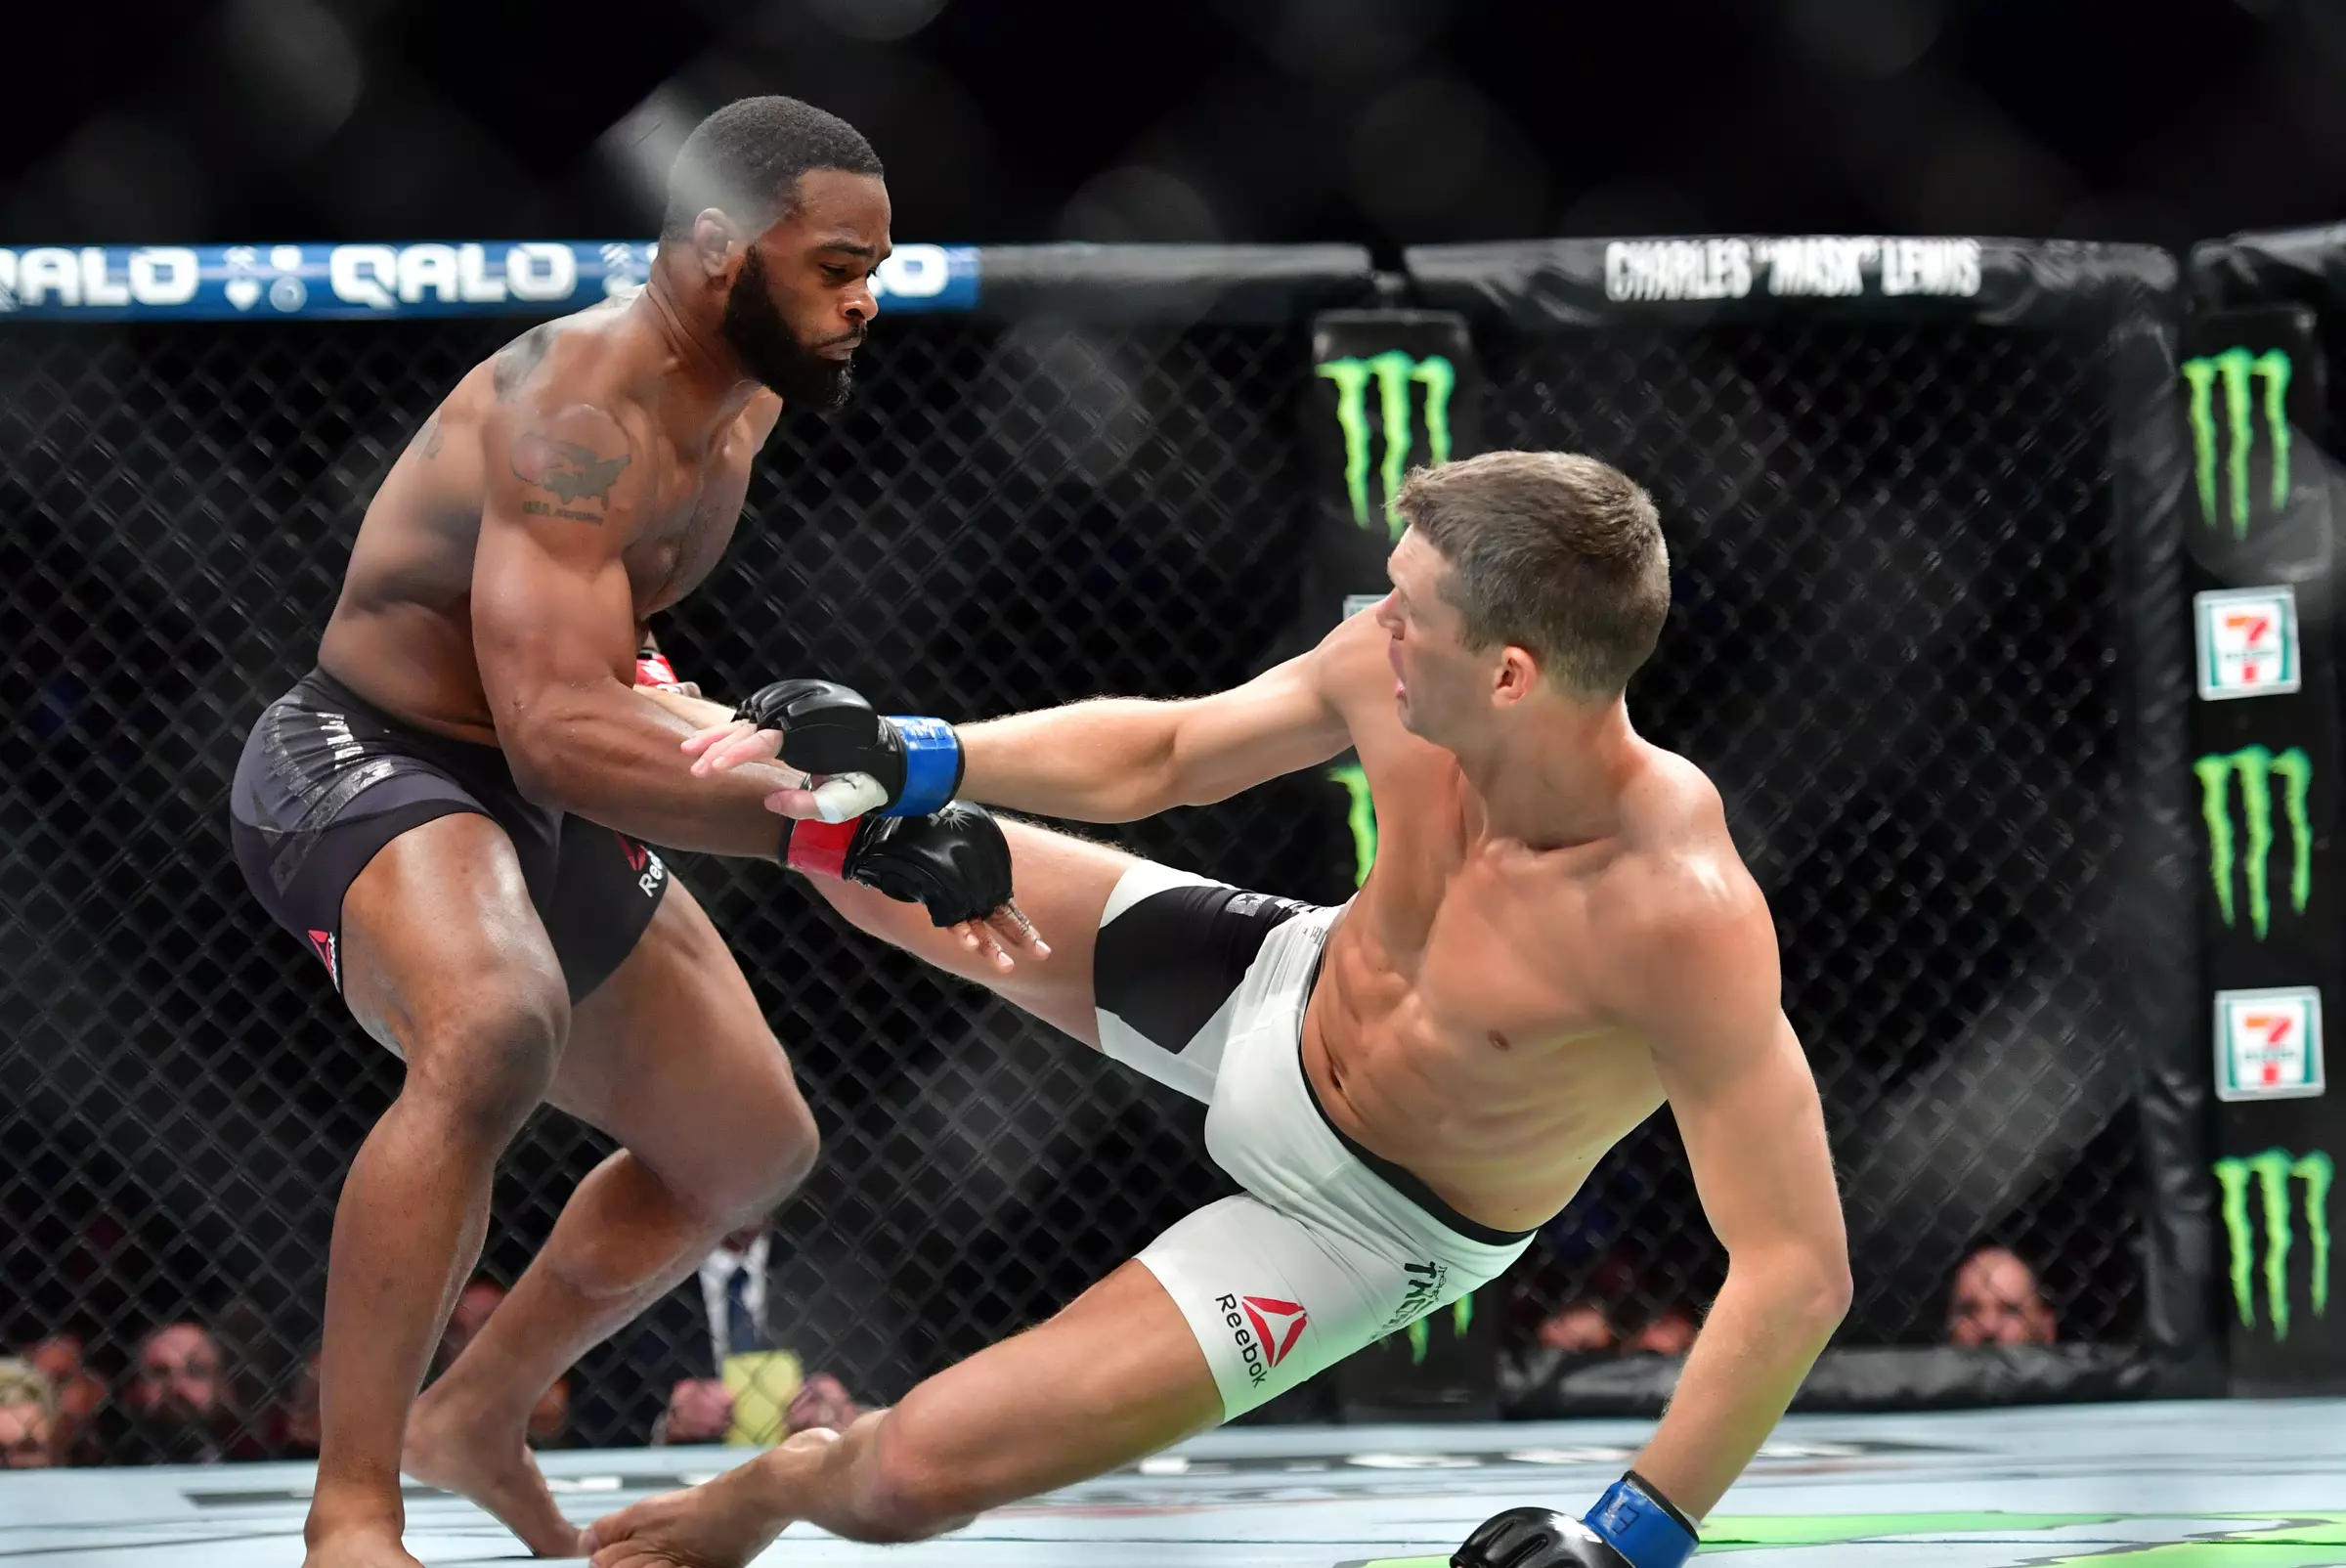 Tyron Woodley wants a big challenge to motivate himself and sees Khabib as the perfect challenge